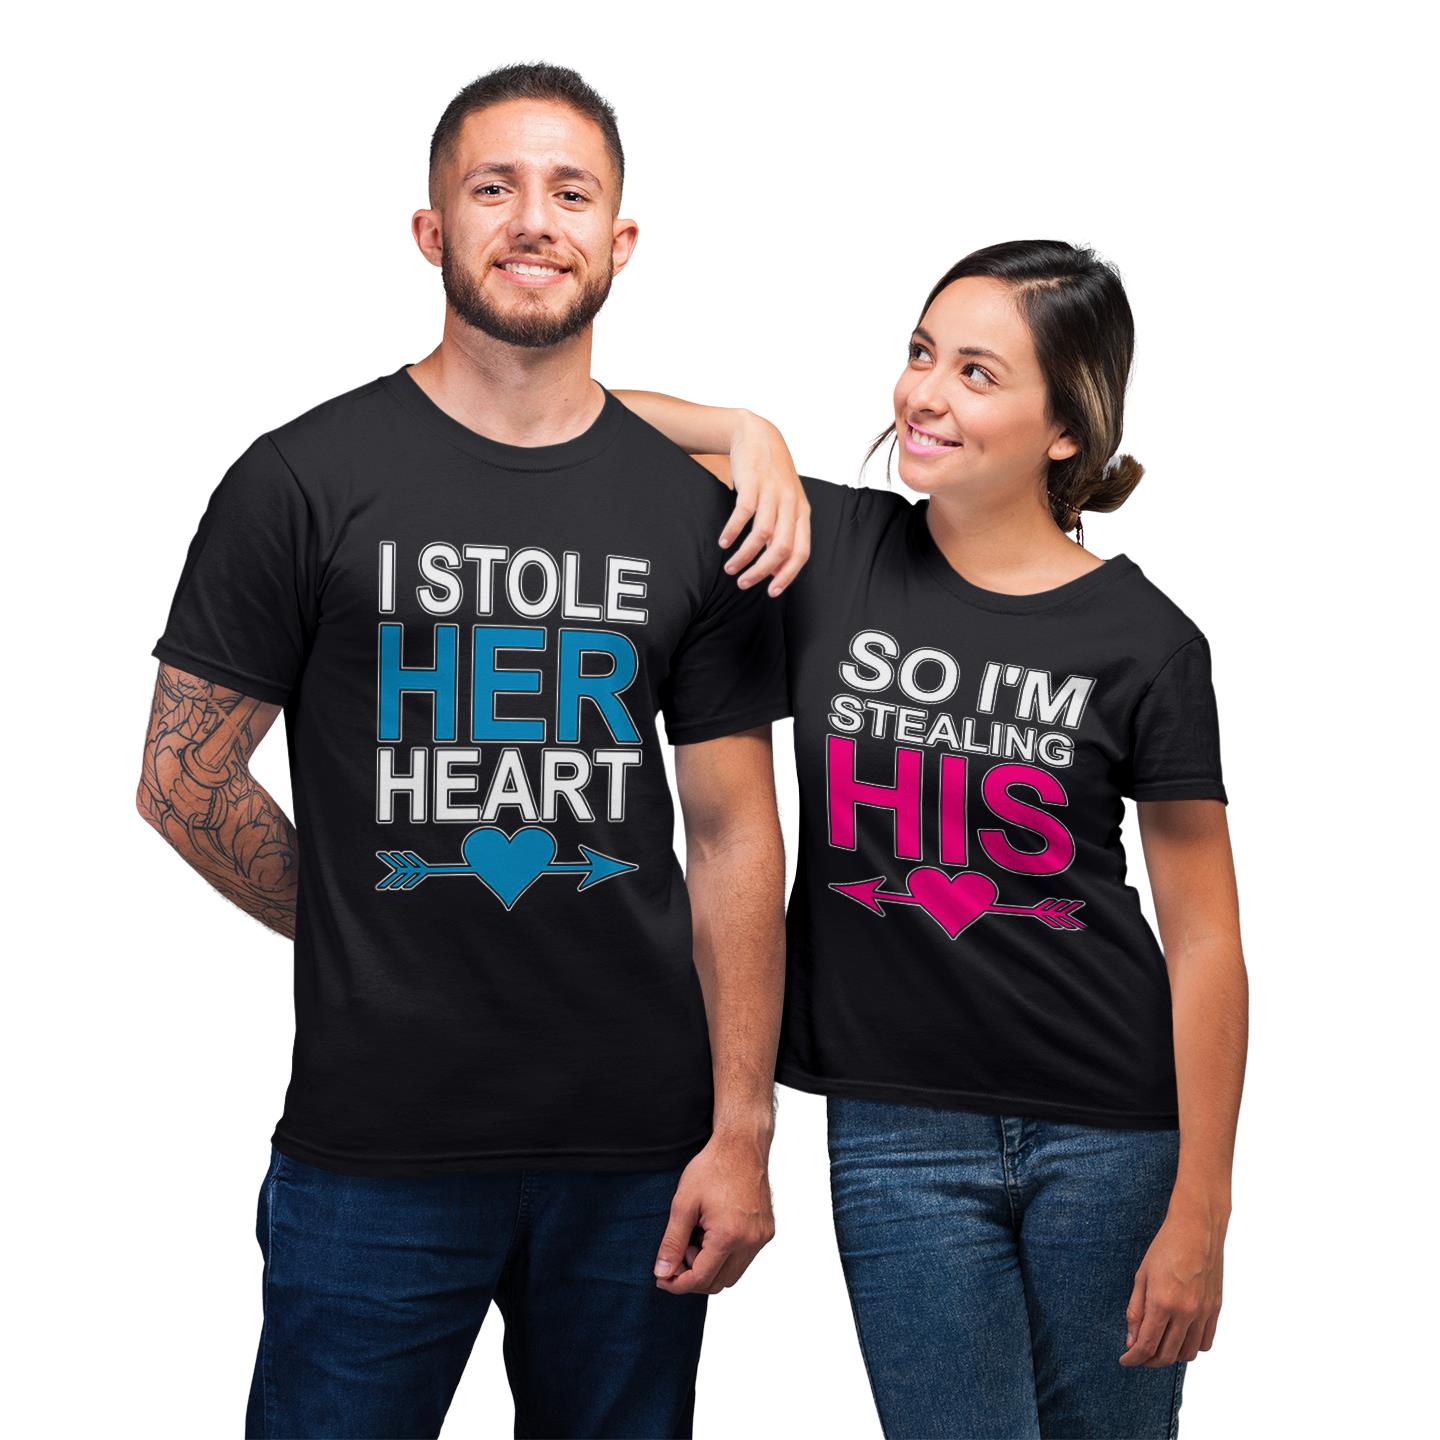 I Stole His Her Heart Shirt For Couple Matching T-shirt